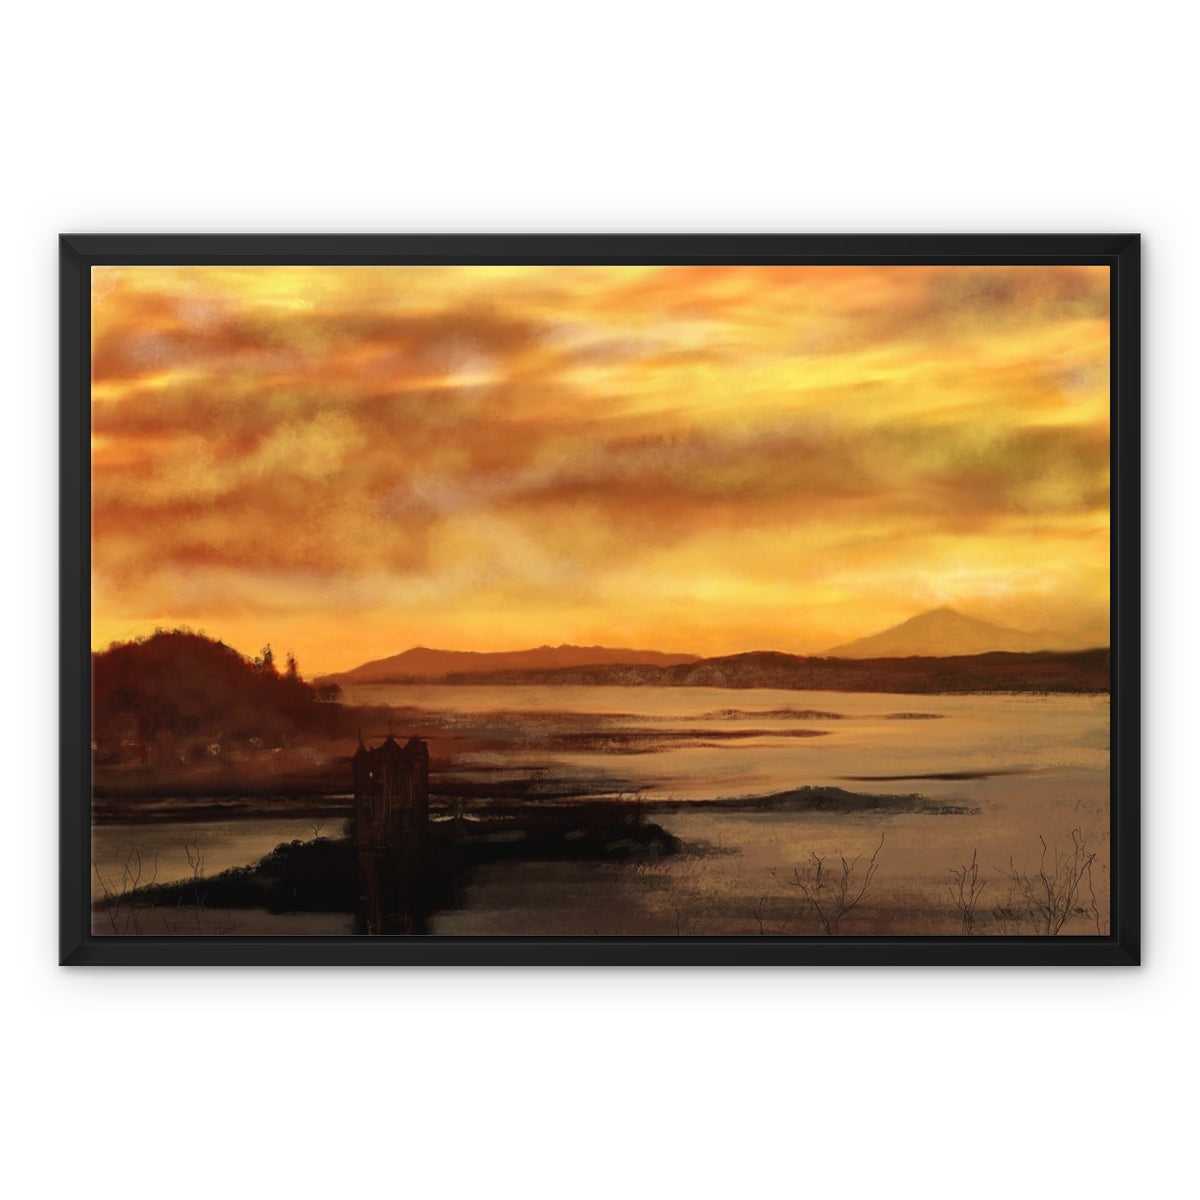 Castle Stalker Dusk Painting | Framed Canvas From Scotland-Floating Framed Canvas Prints-Historic & Iconic Scotland Art Gallery-24"x18"-Paintings, Prints, Homeware, Art Gifts From Scotland By Scottish Artist Kevin Hunter